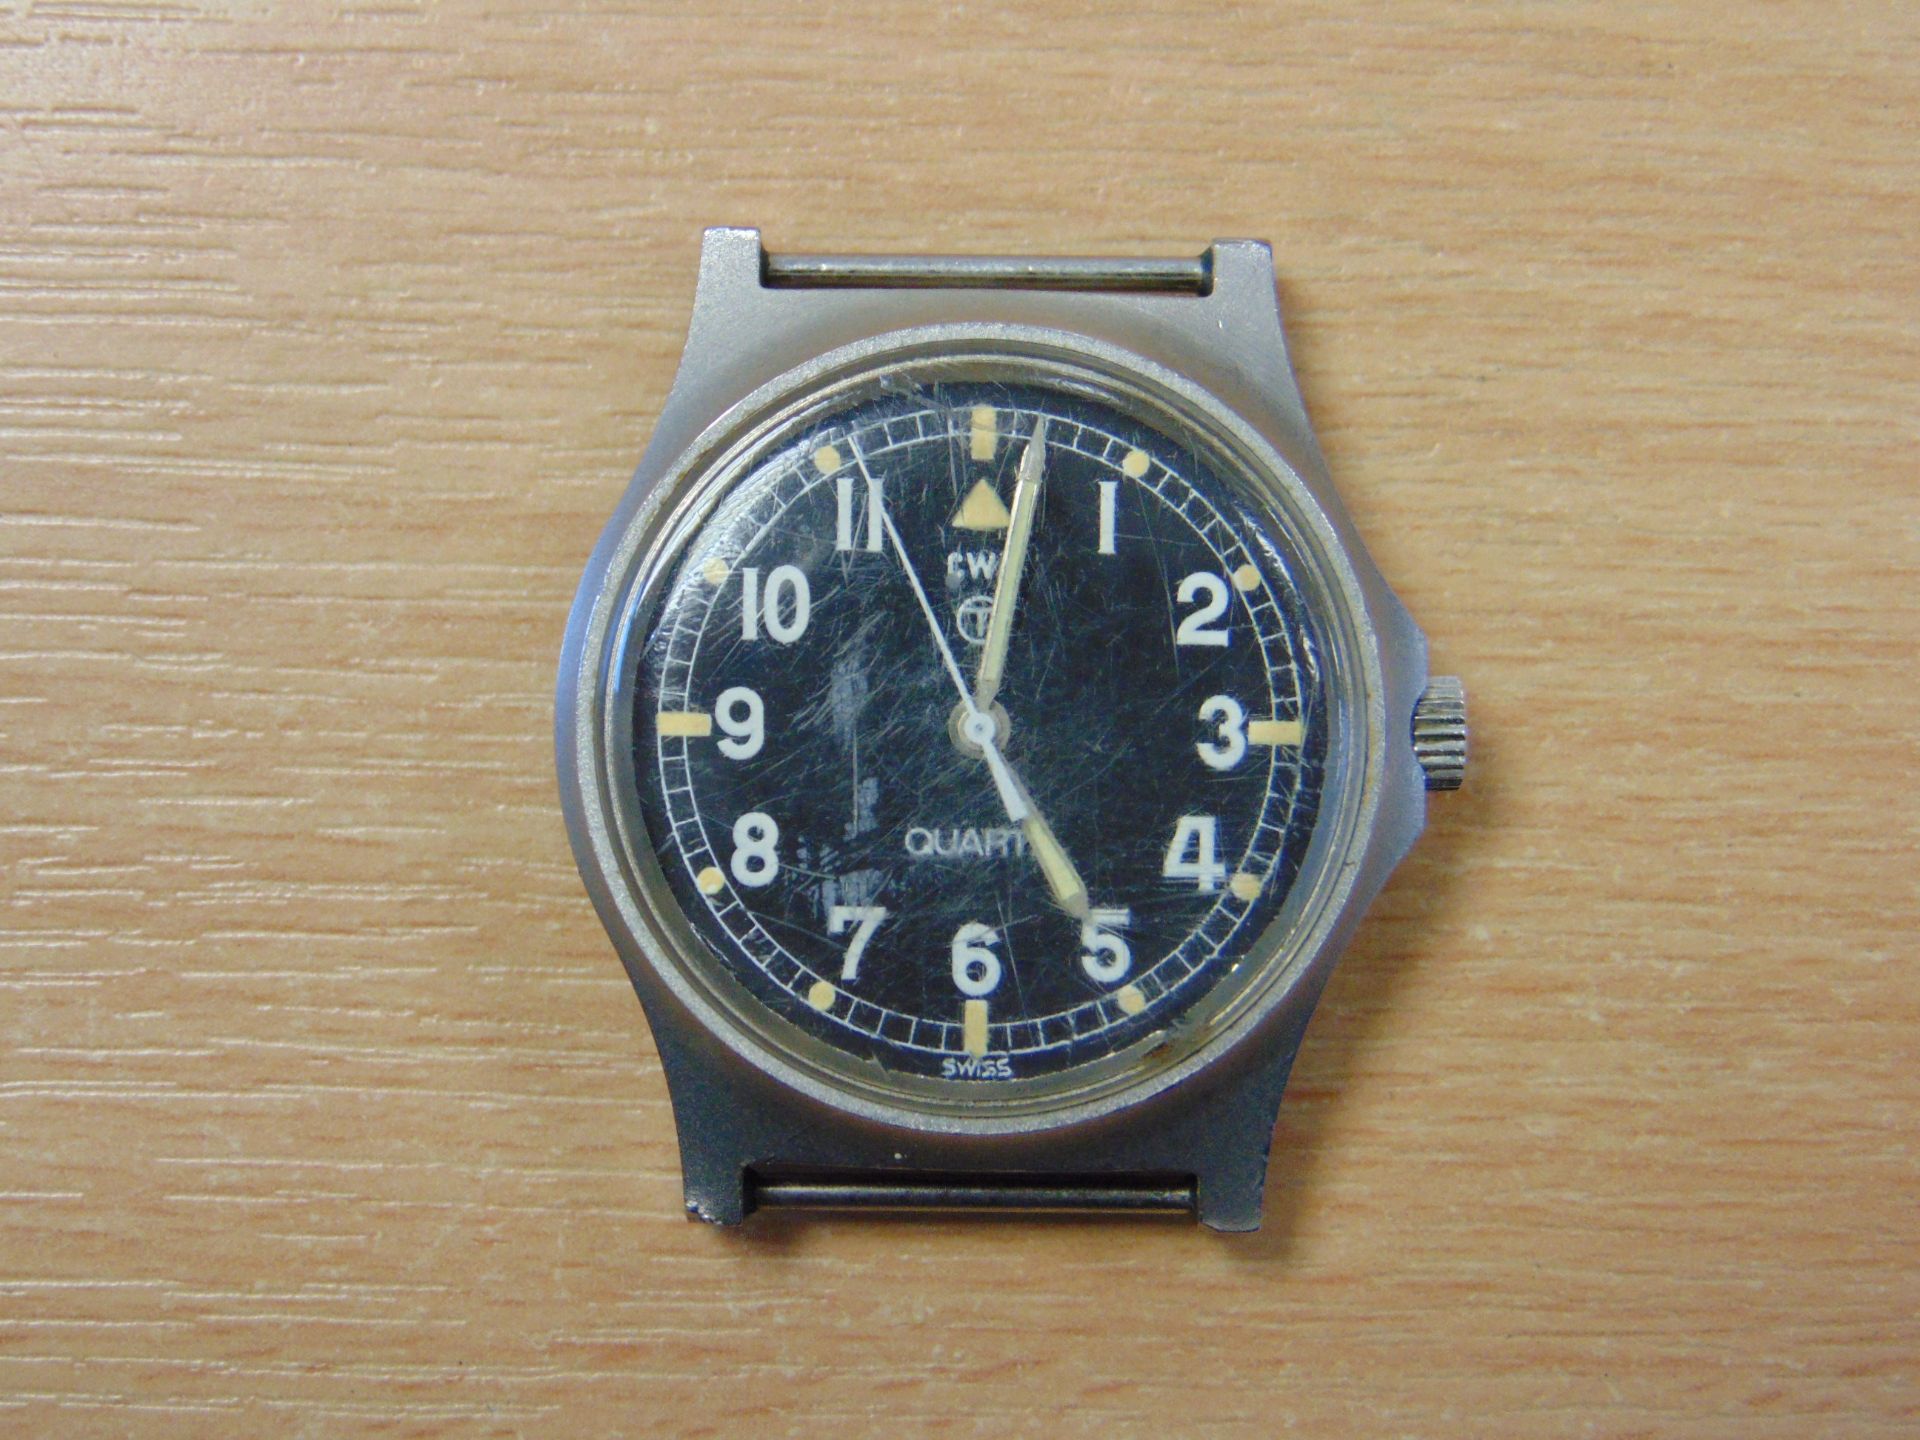 Very Rare CWC G10 British Army Fat Boy Service Watch Date 1980 - Image 2 of 4